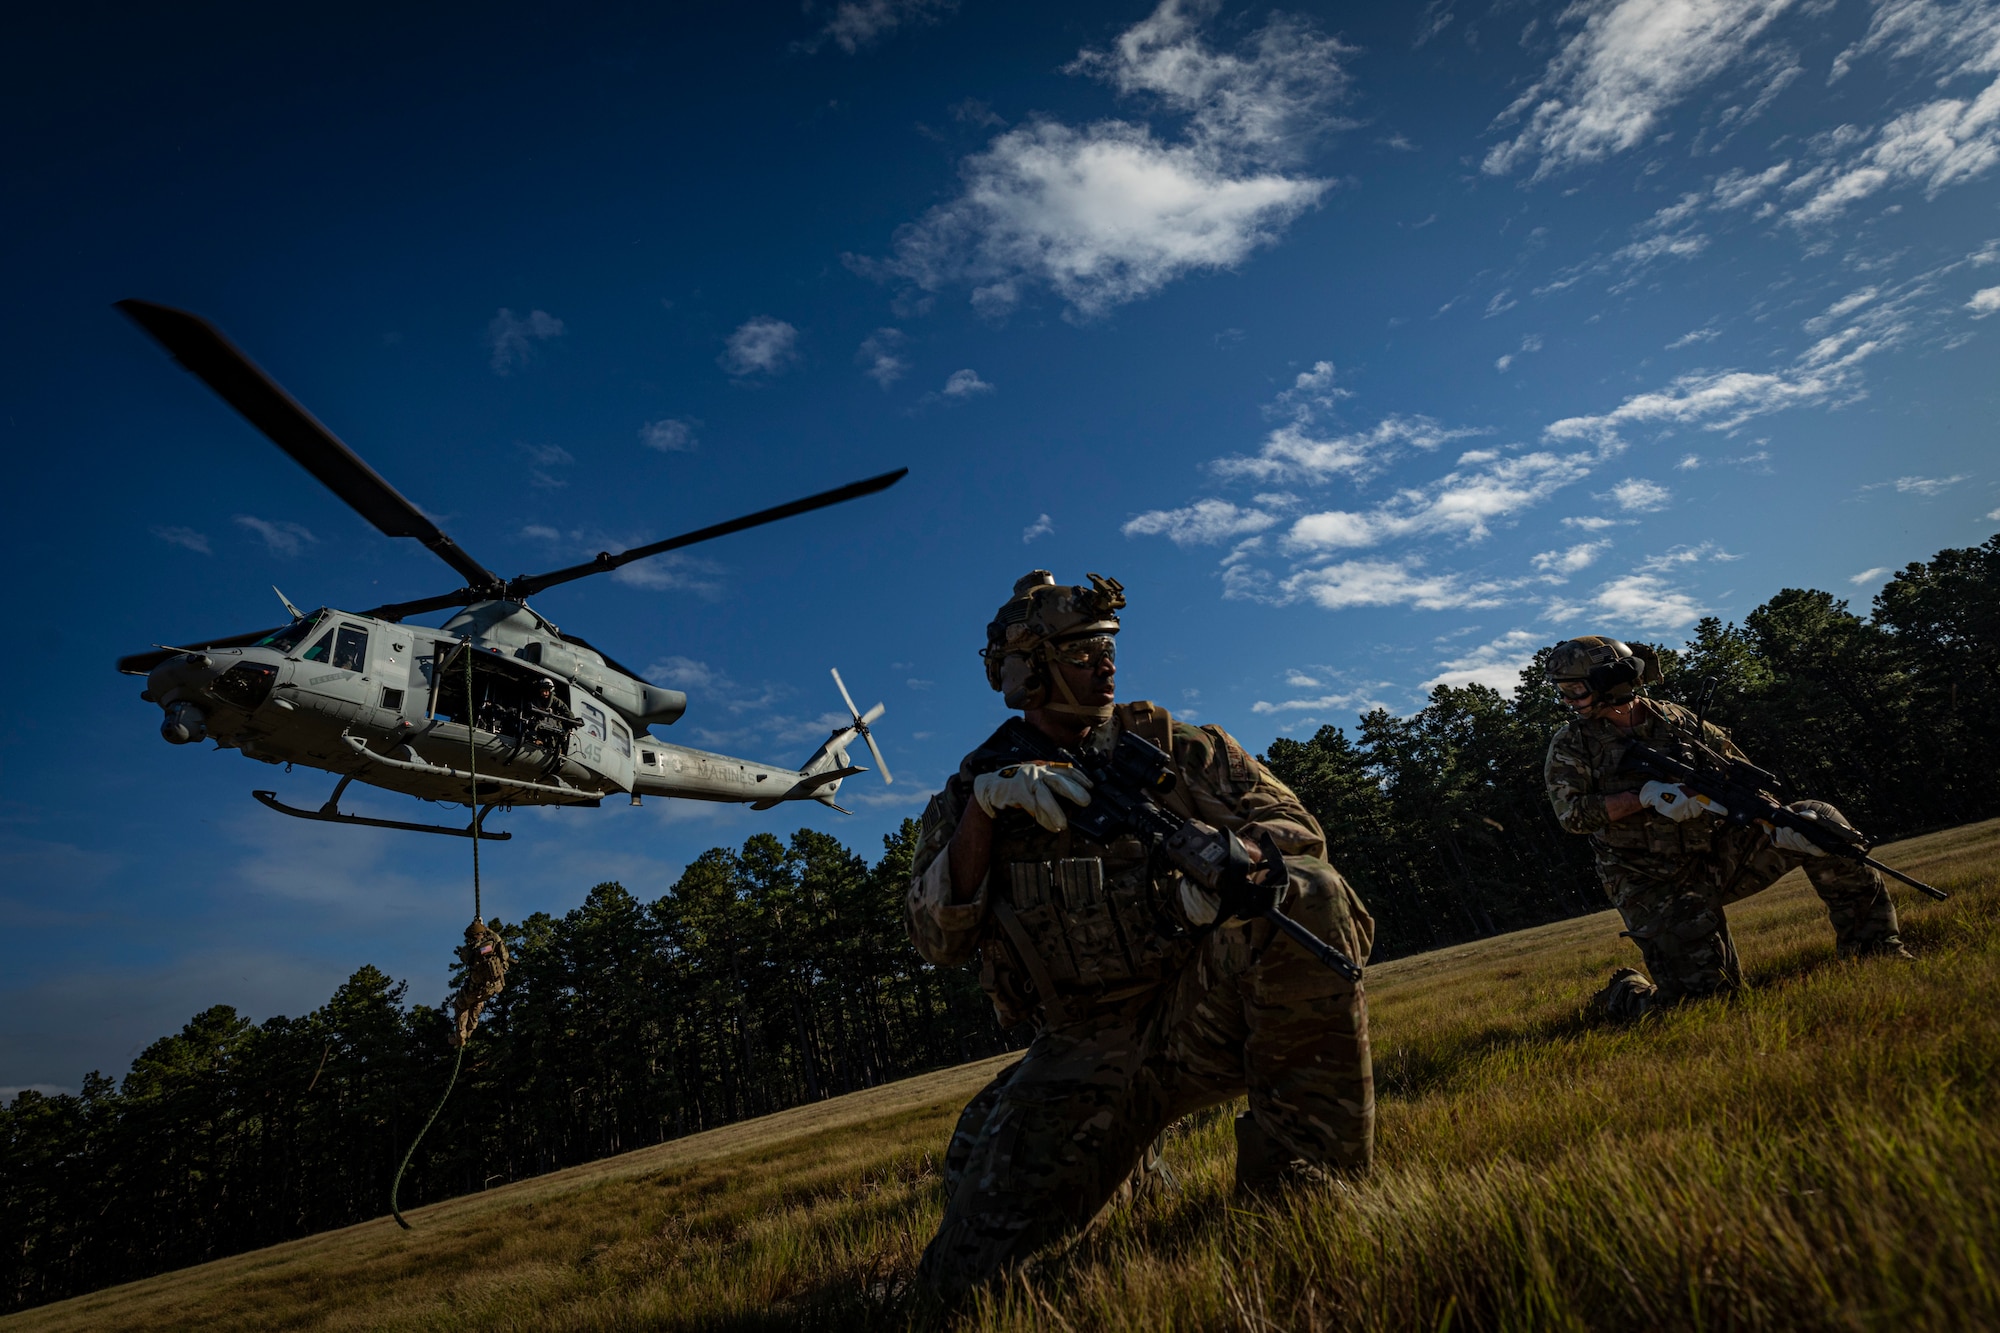 Special Warfare Airmen with the New Jersey Air National Guard’s 227th Air Support Operations Squadron fast rope from a UH-1Y Venom helicopter with Marine Light Attack Helicopter Squadron 773 during training on Joint Base McGuire-Dix-Lakehurst, N.J., Oct. 10, 2019. (U.S. Air National Guard photo by Master Sgt. Matt Hecht)